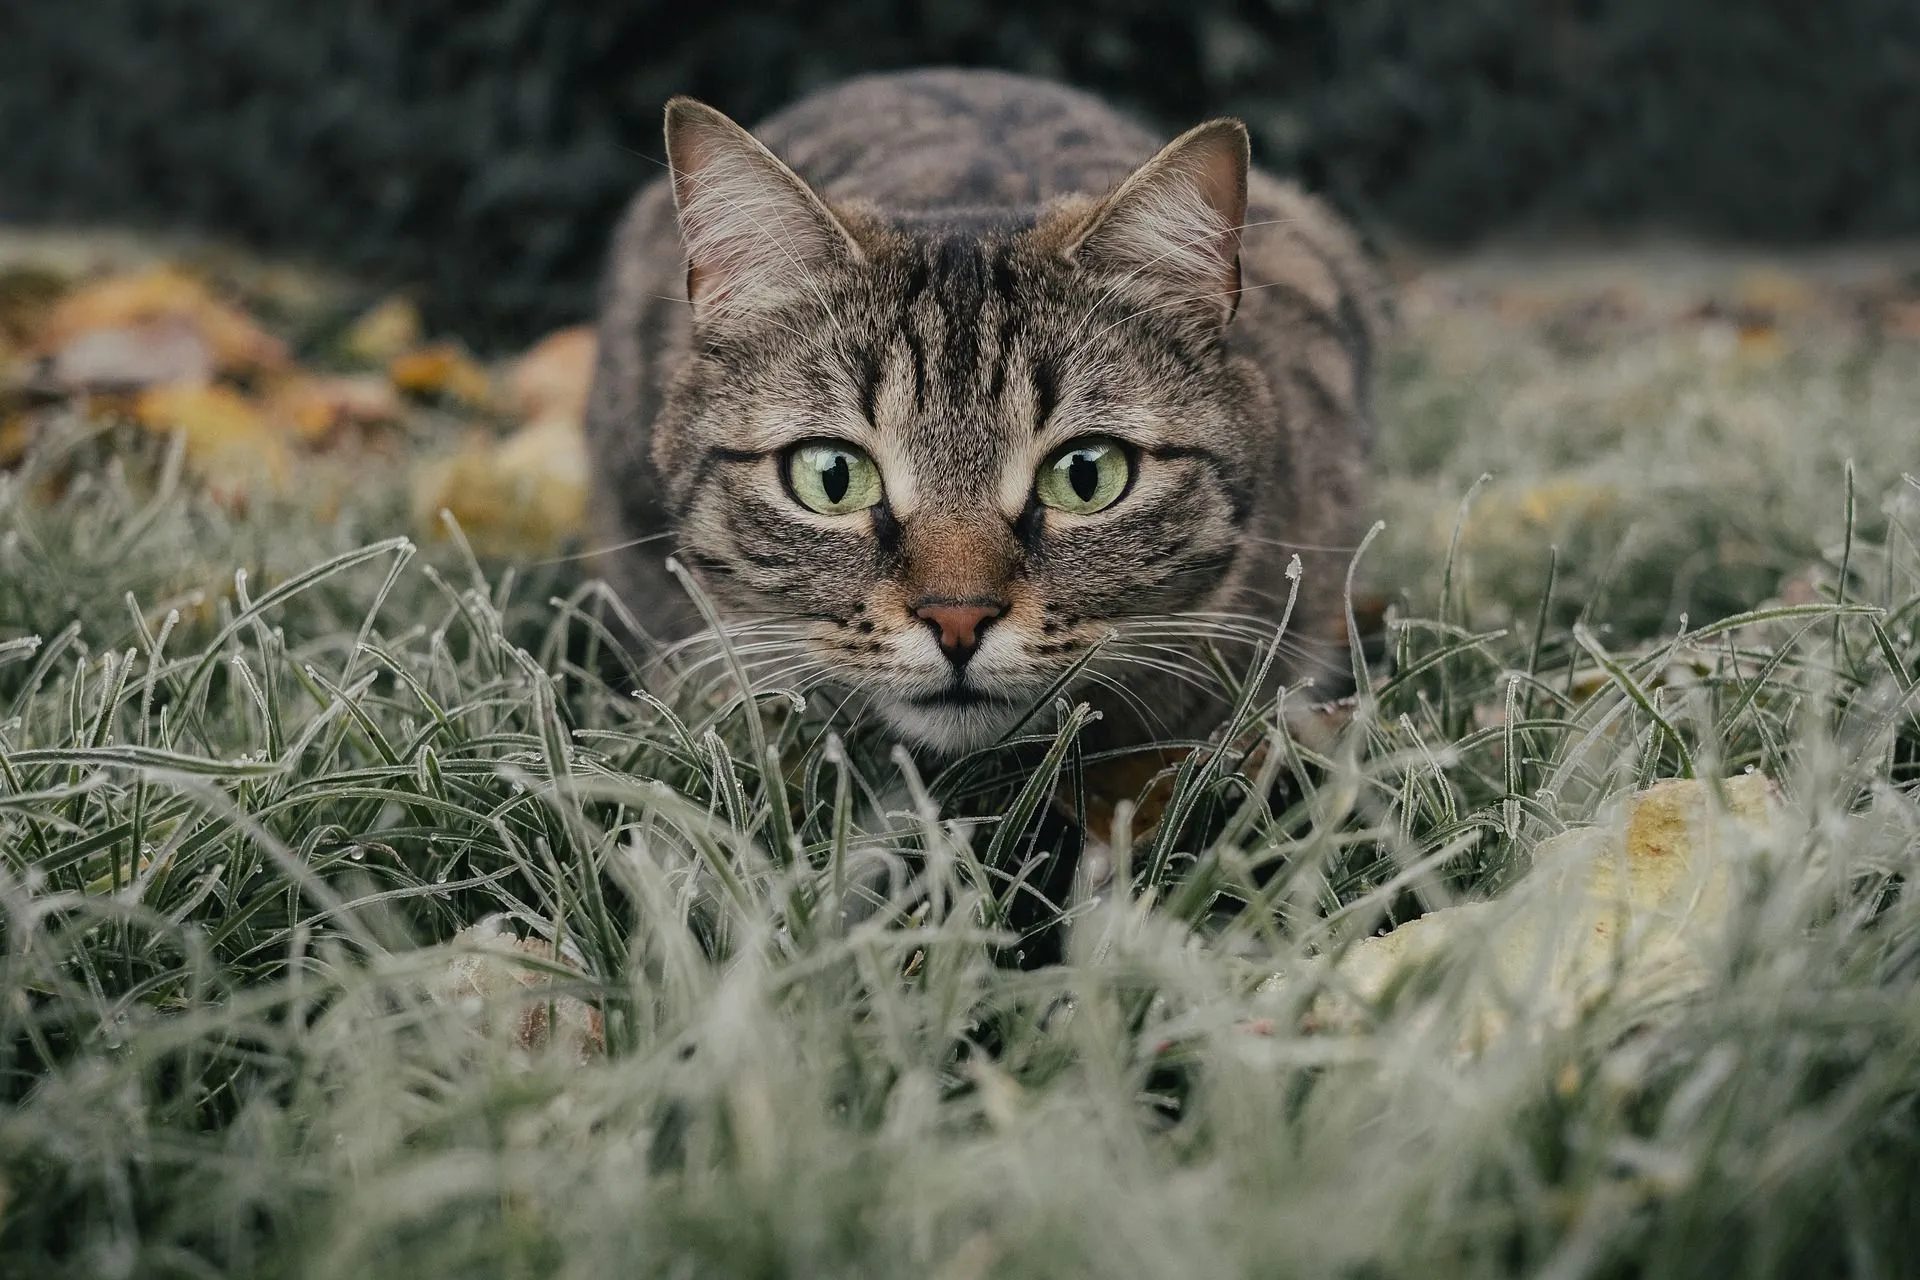 Tabbies live for an average of 10-20 years as household pets.